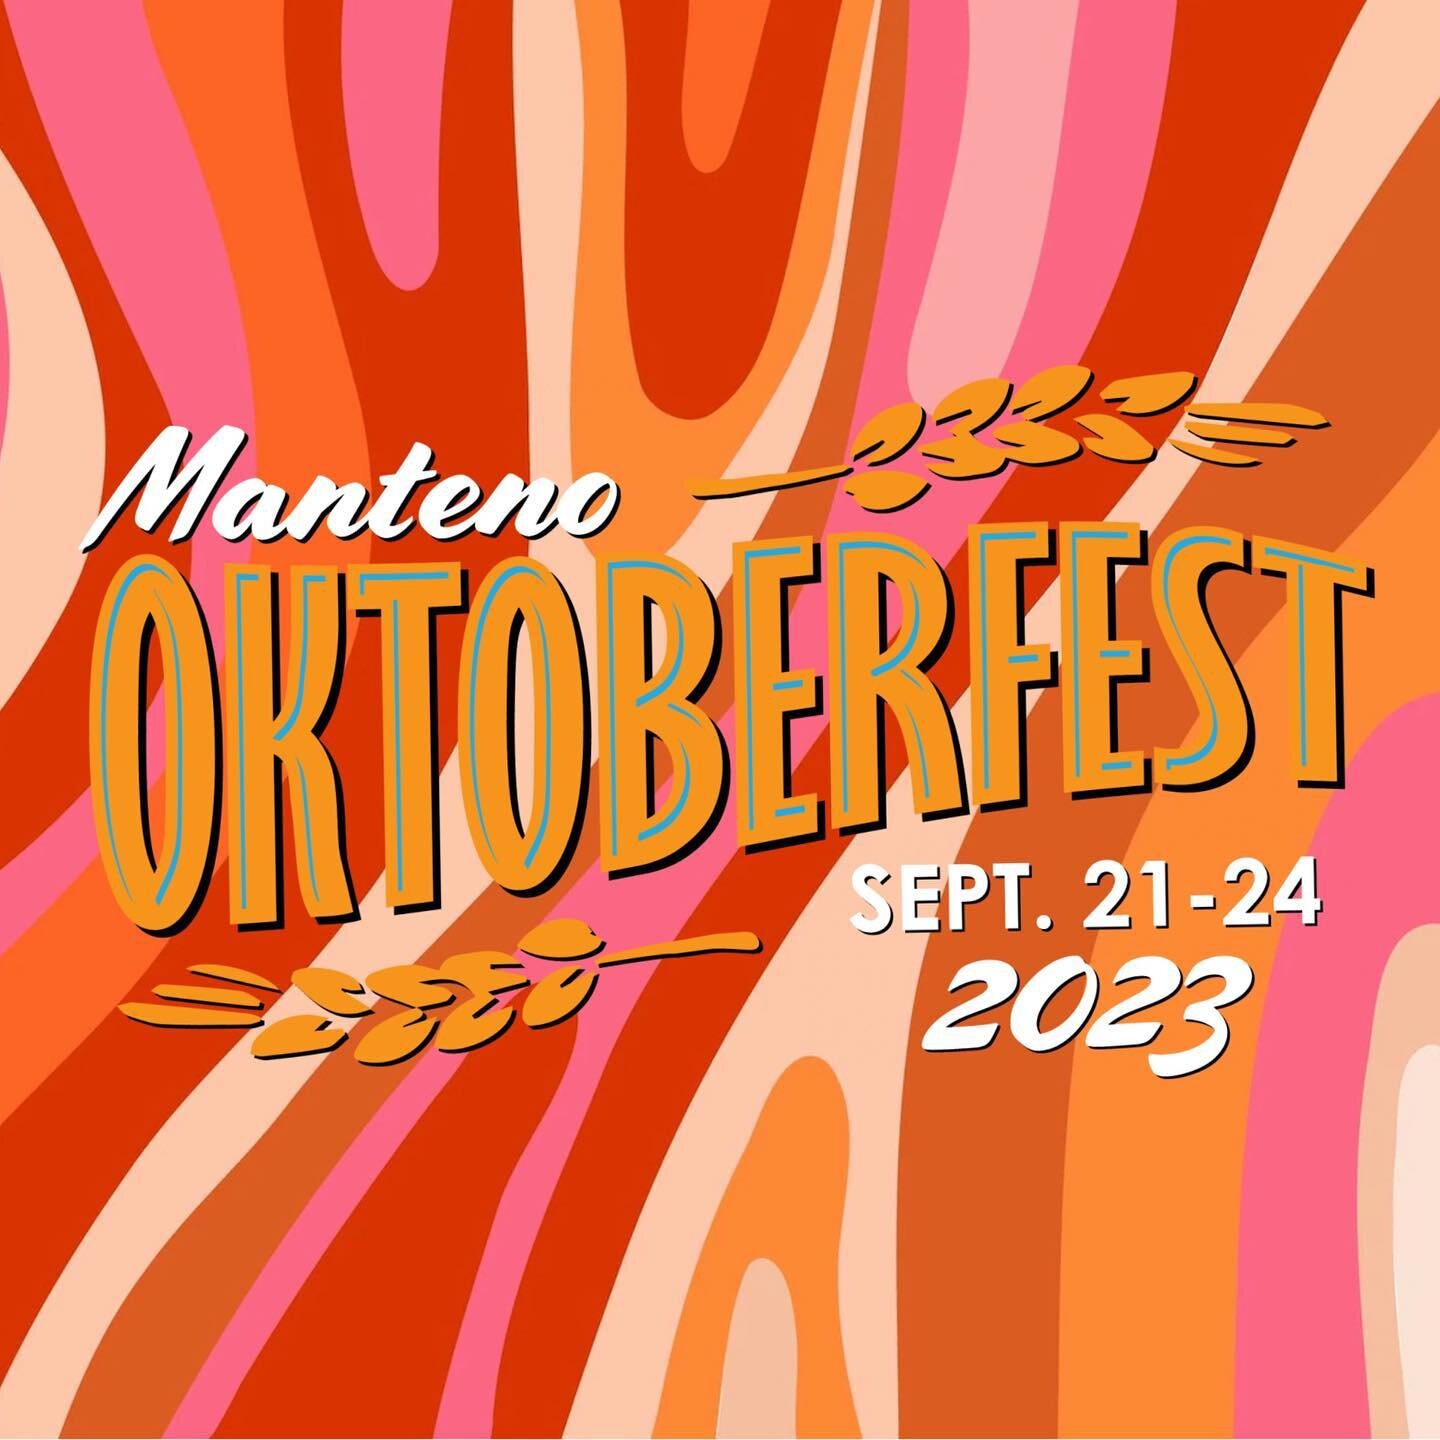 Manteno Oktoberfest // 9.22.23 // 6:30PM

🎟️details at the link in our bio🎟️ 

We&rsquo;ll be there Friday night! Come have a beer and enjoy the music of Fleetwood Mac. 🍻 

.
.
.

#mantenoillinois #oktoberfest #chicagolandmusic #chicago #fleetwood